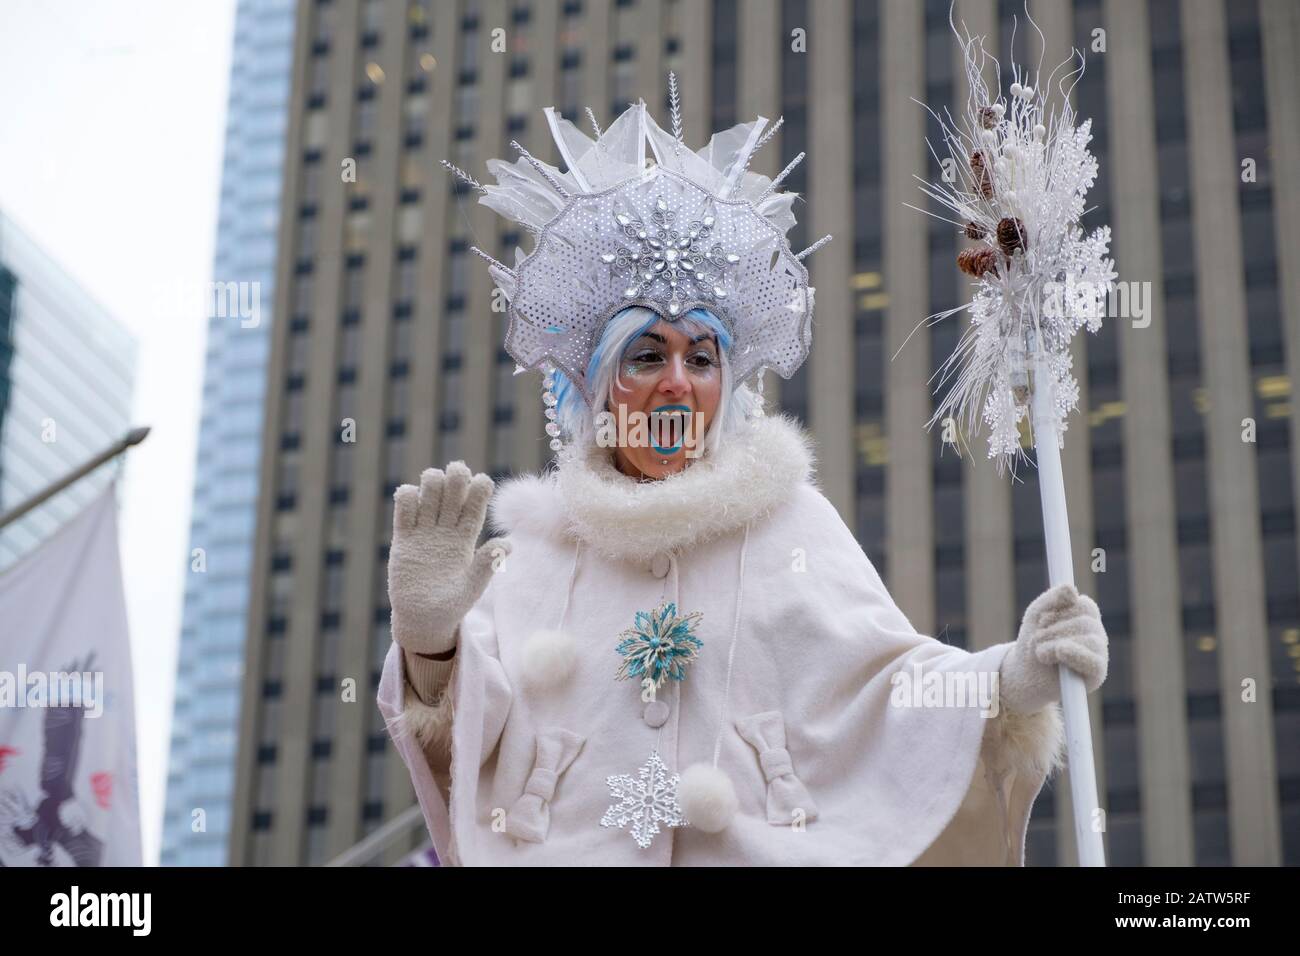 A winter solstice holding a magic wand and waving in downtown Toronto announces that winter is here. It's a traditional parade in some cultures. Stock Photo